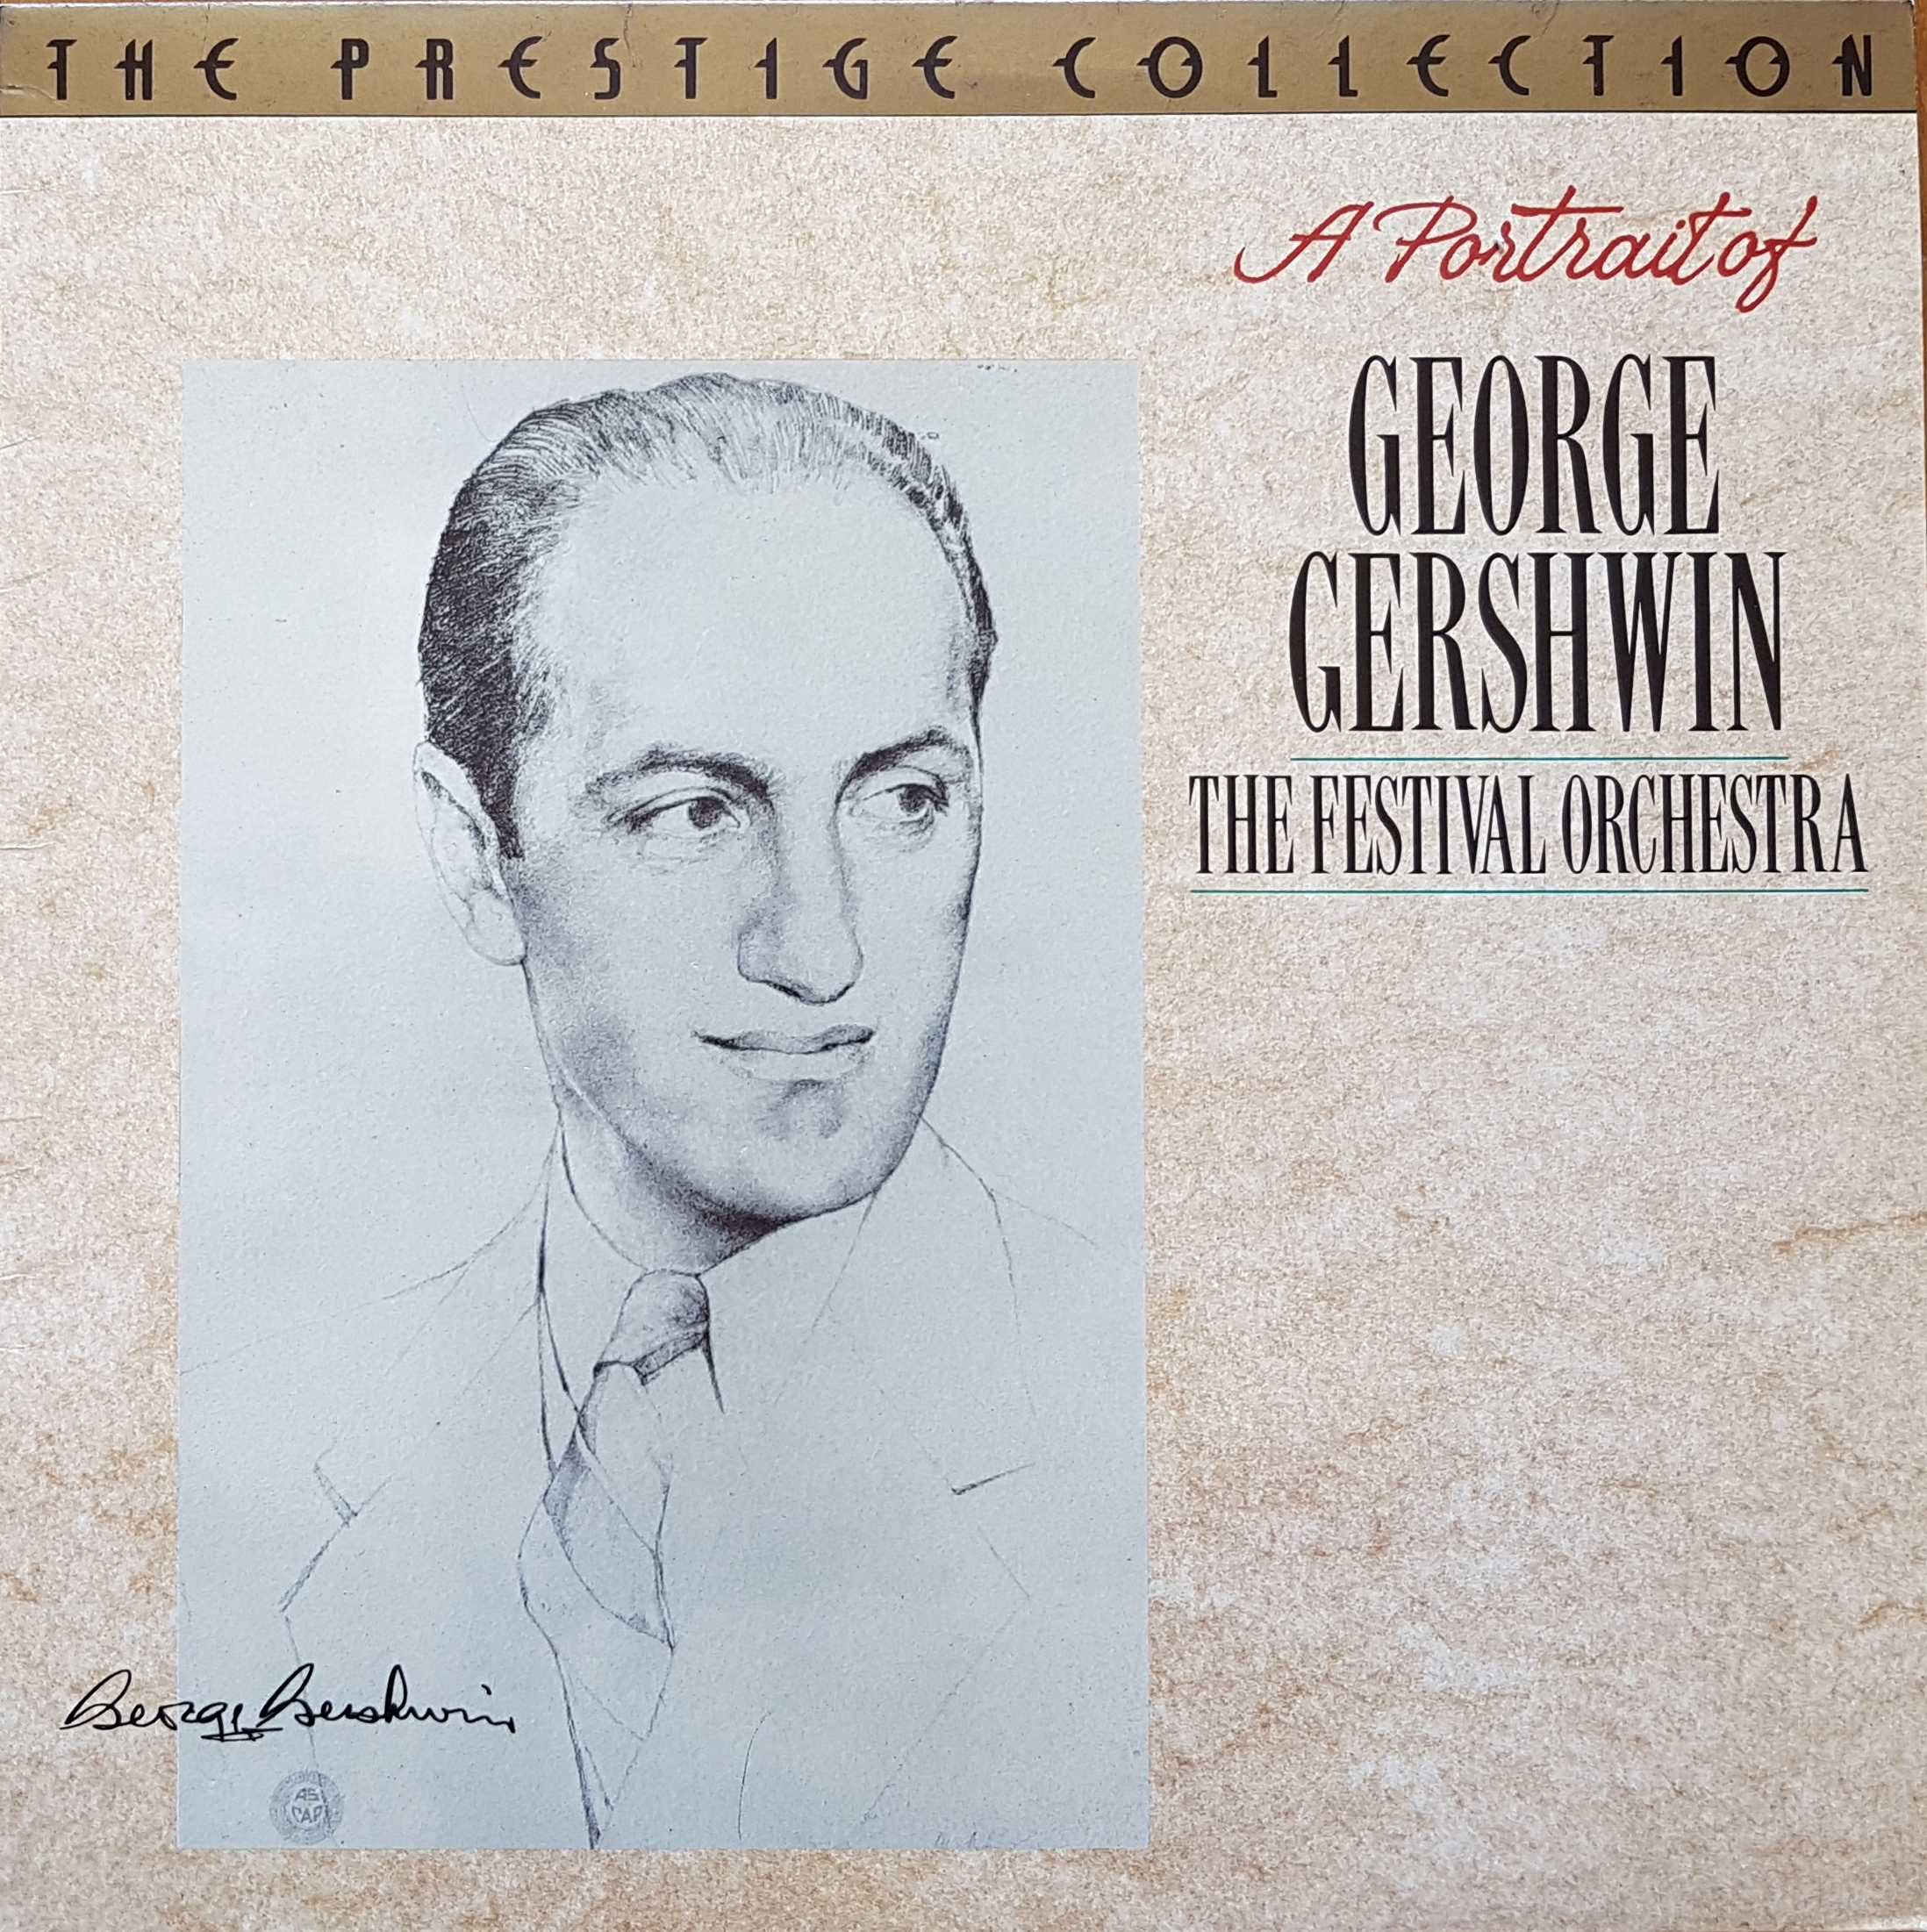 Picture of A portrait of George Gershwin by artist George Gershwin from the BBC albums - Records and Tapes library